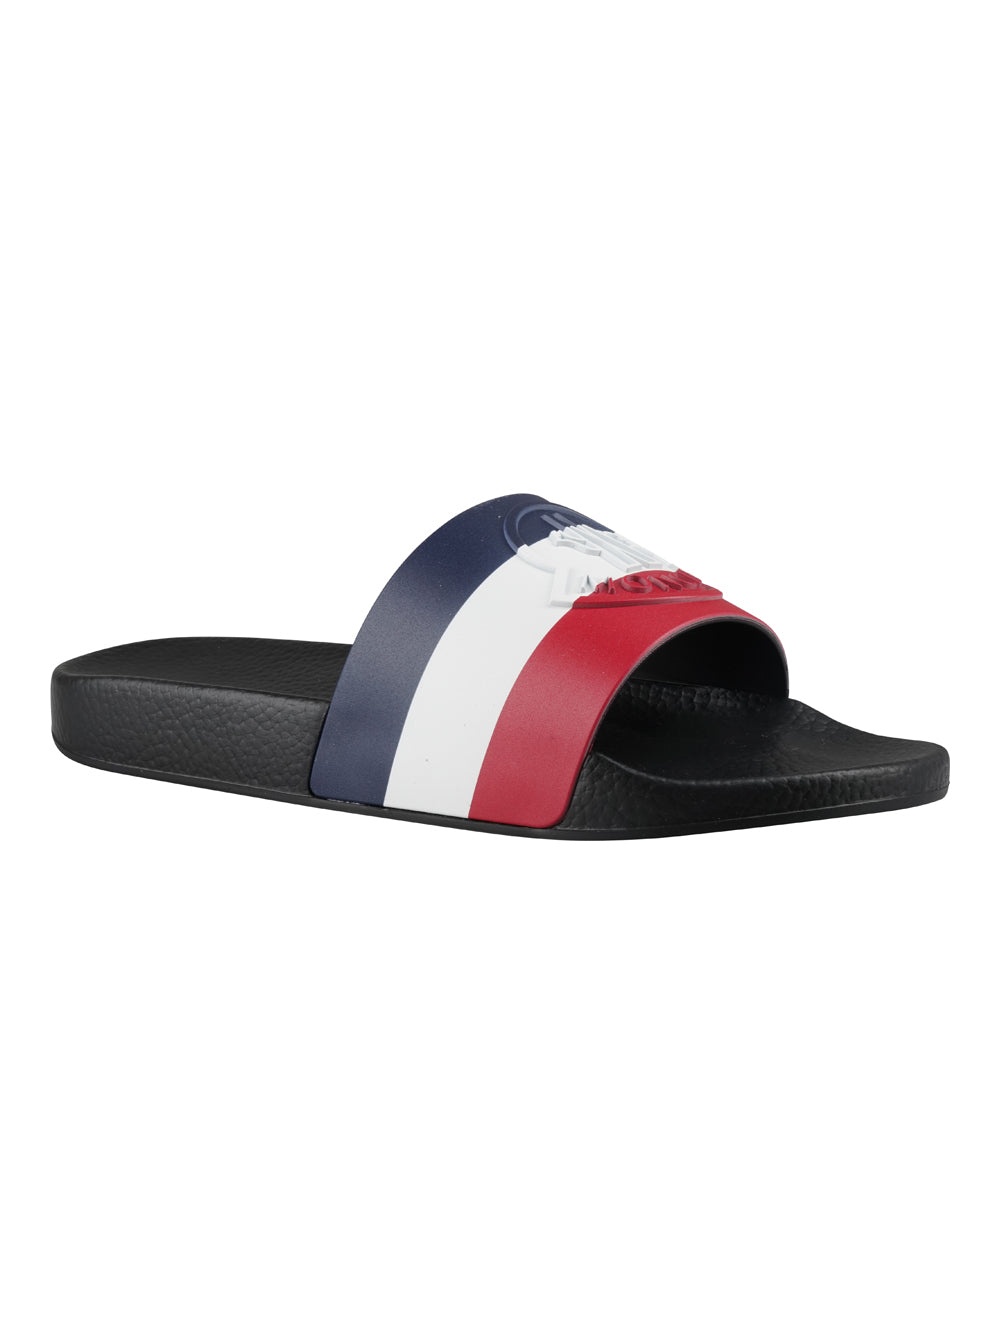 MONCLER MULTICOLOR SLIPPERS - 3